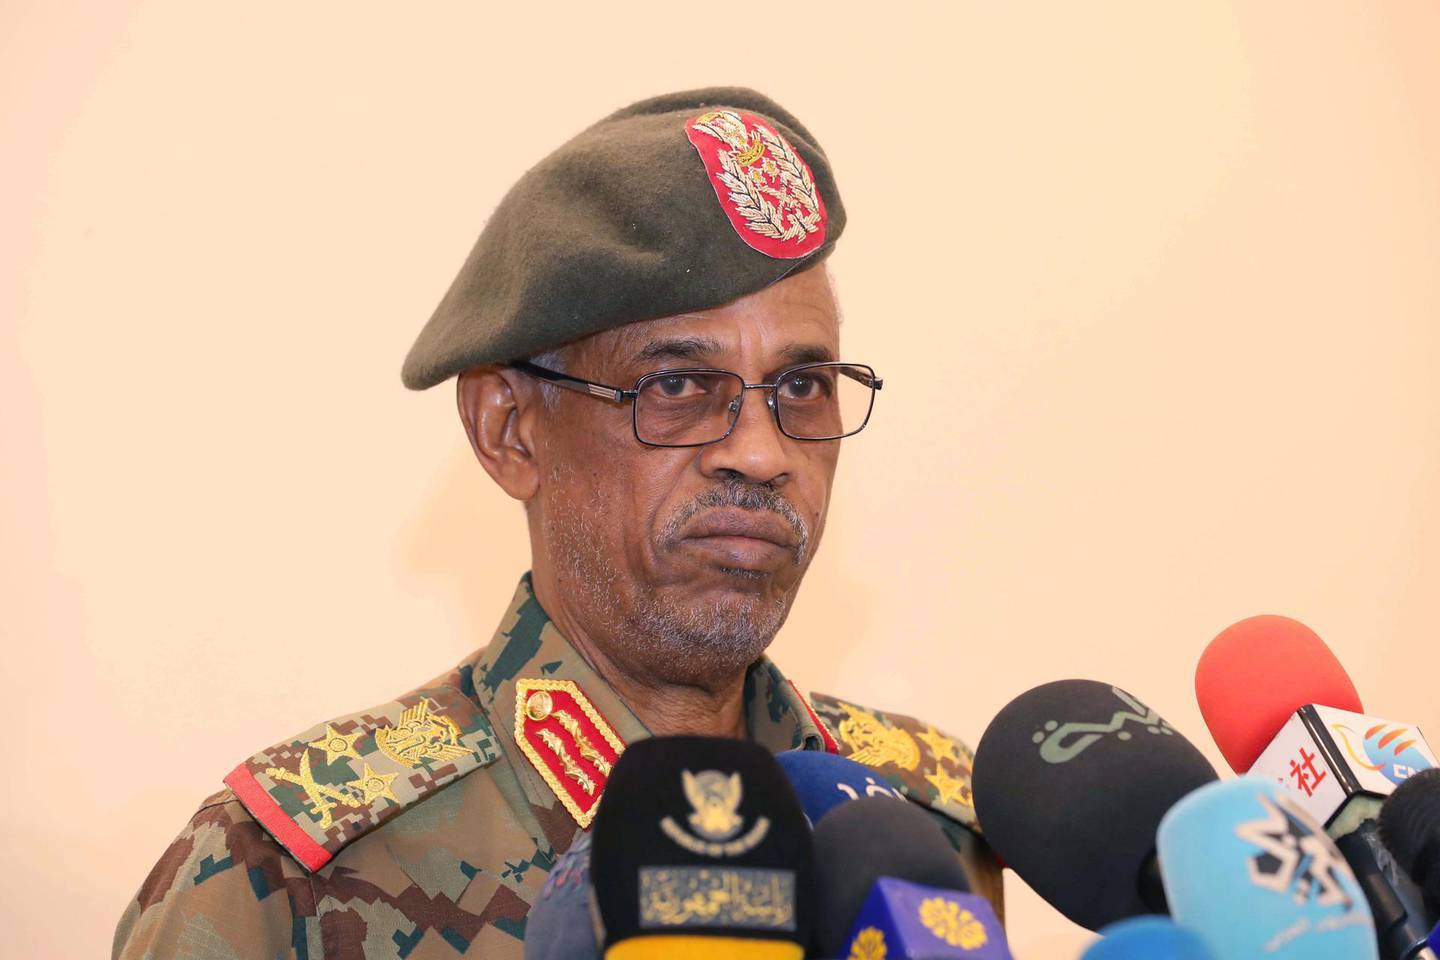 epa07501427 Awad Ibn Auf, the Sudanese Defense Minister speaking in Khartoum, Sudan, 27 February 2019, issued 12 April 2019. Reports state that Awad Ibn Auf, the Sudanese Defense Minister Vice President and Chief of Sudan’s new ruling Council since 11 April 2019  announced that Sudan's President Omar al-Bashir has been ousted and arrested by the military after nearly 30 years in power and that the future would be decided by the protesters who took to the streets.  EPA/STR